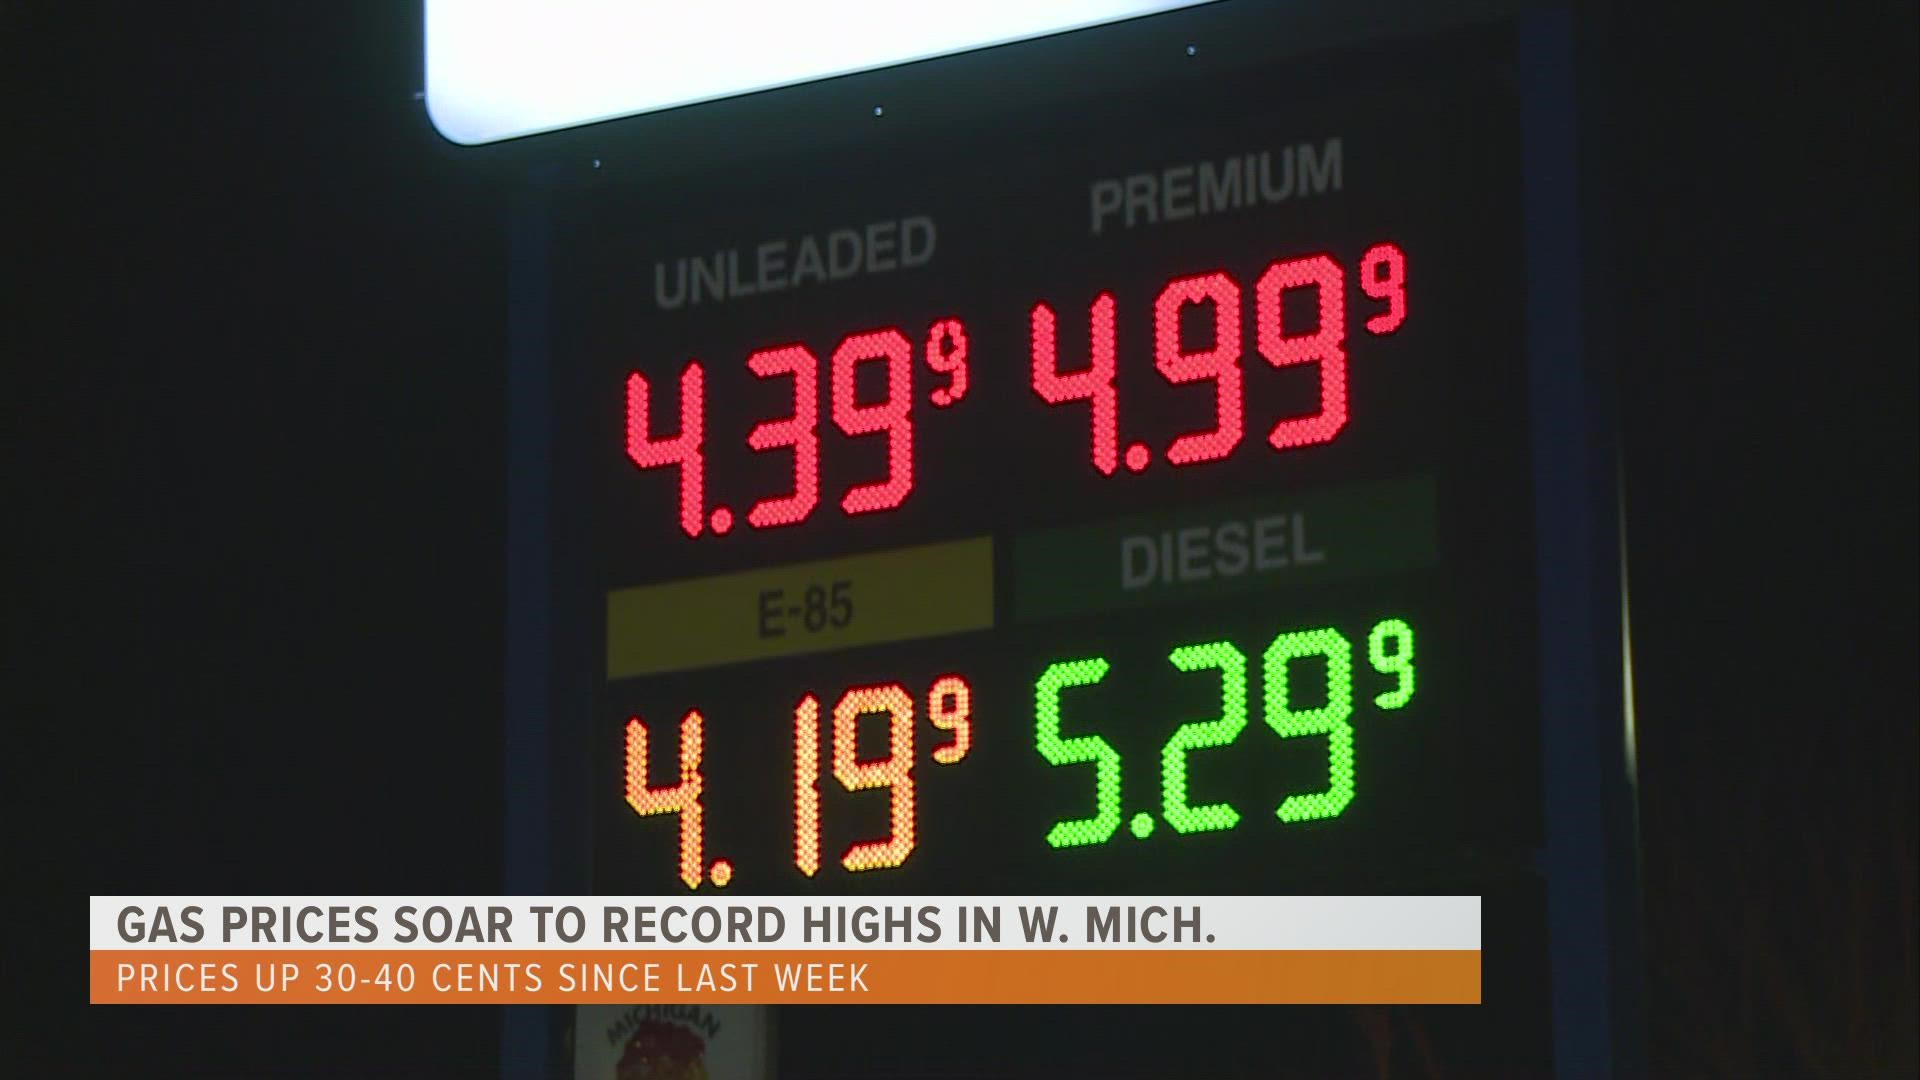 Why is gas so high right now, when just weeks ago it seemed like prices were stabilizing? We spoke with an expert to find out.